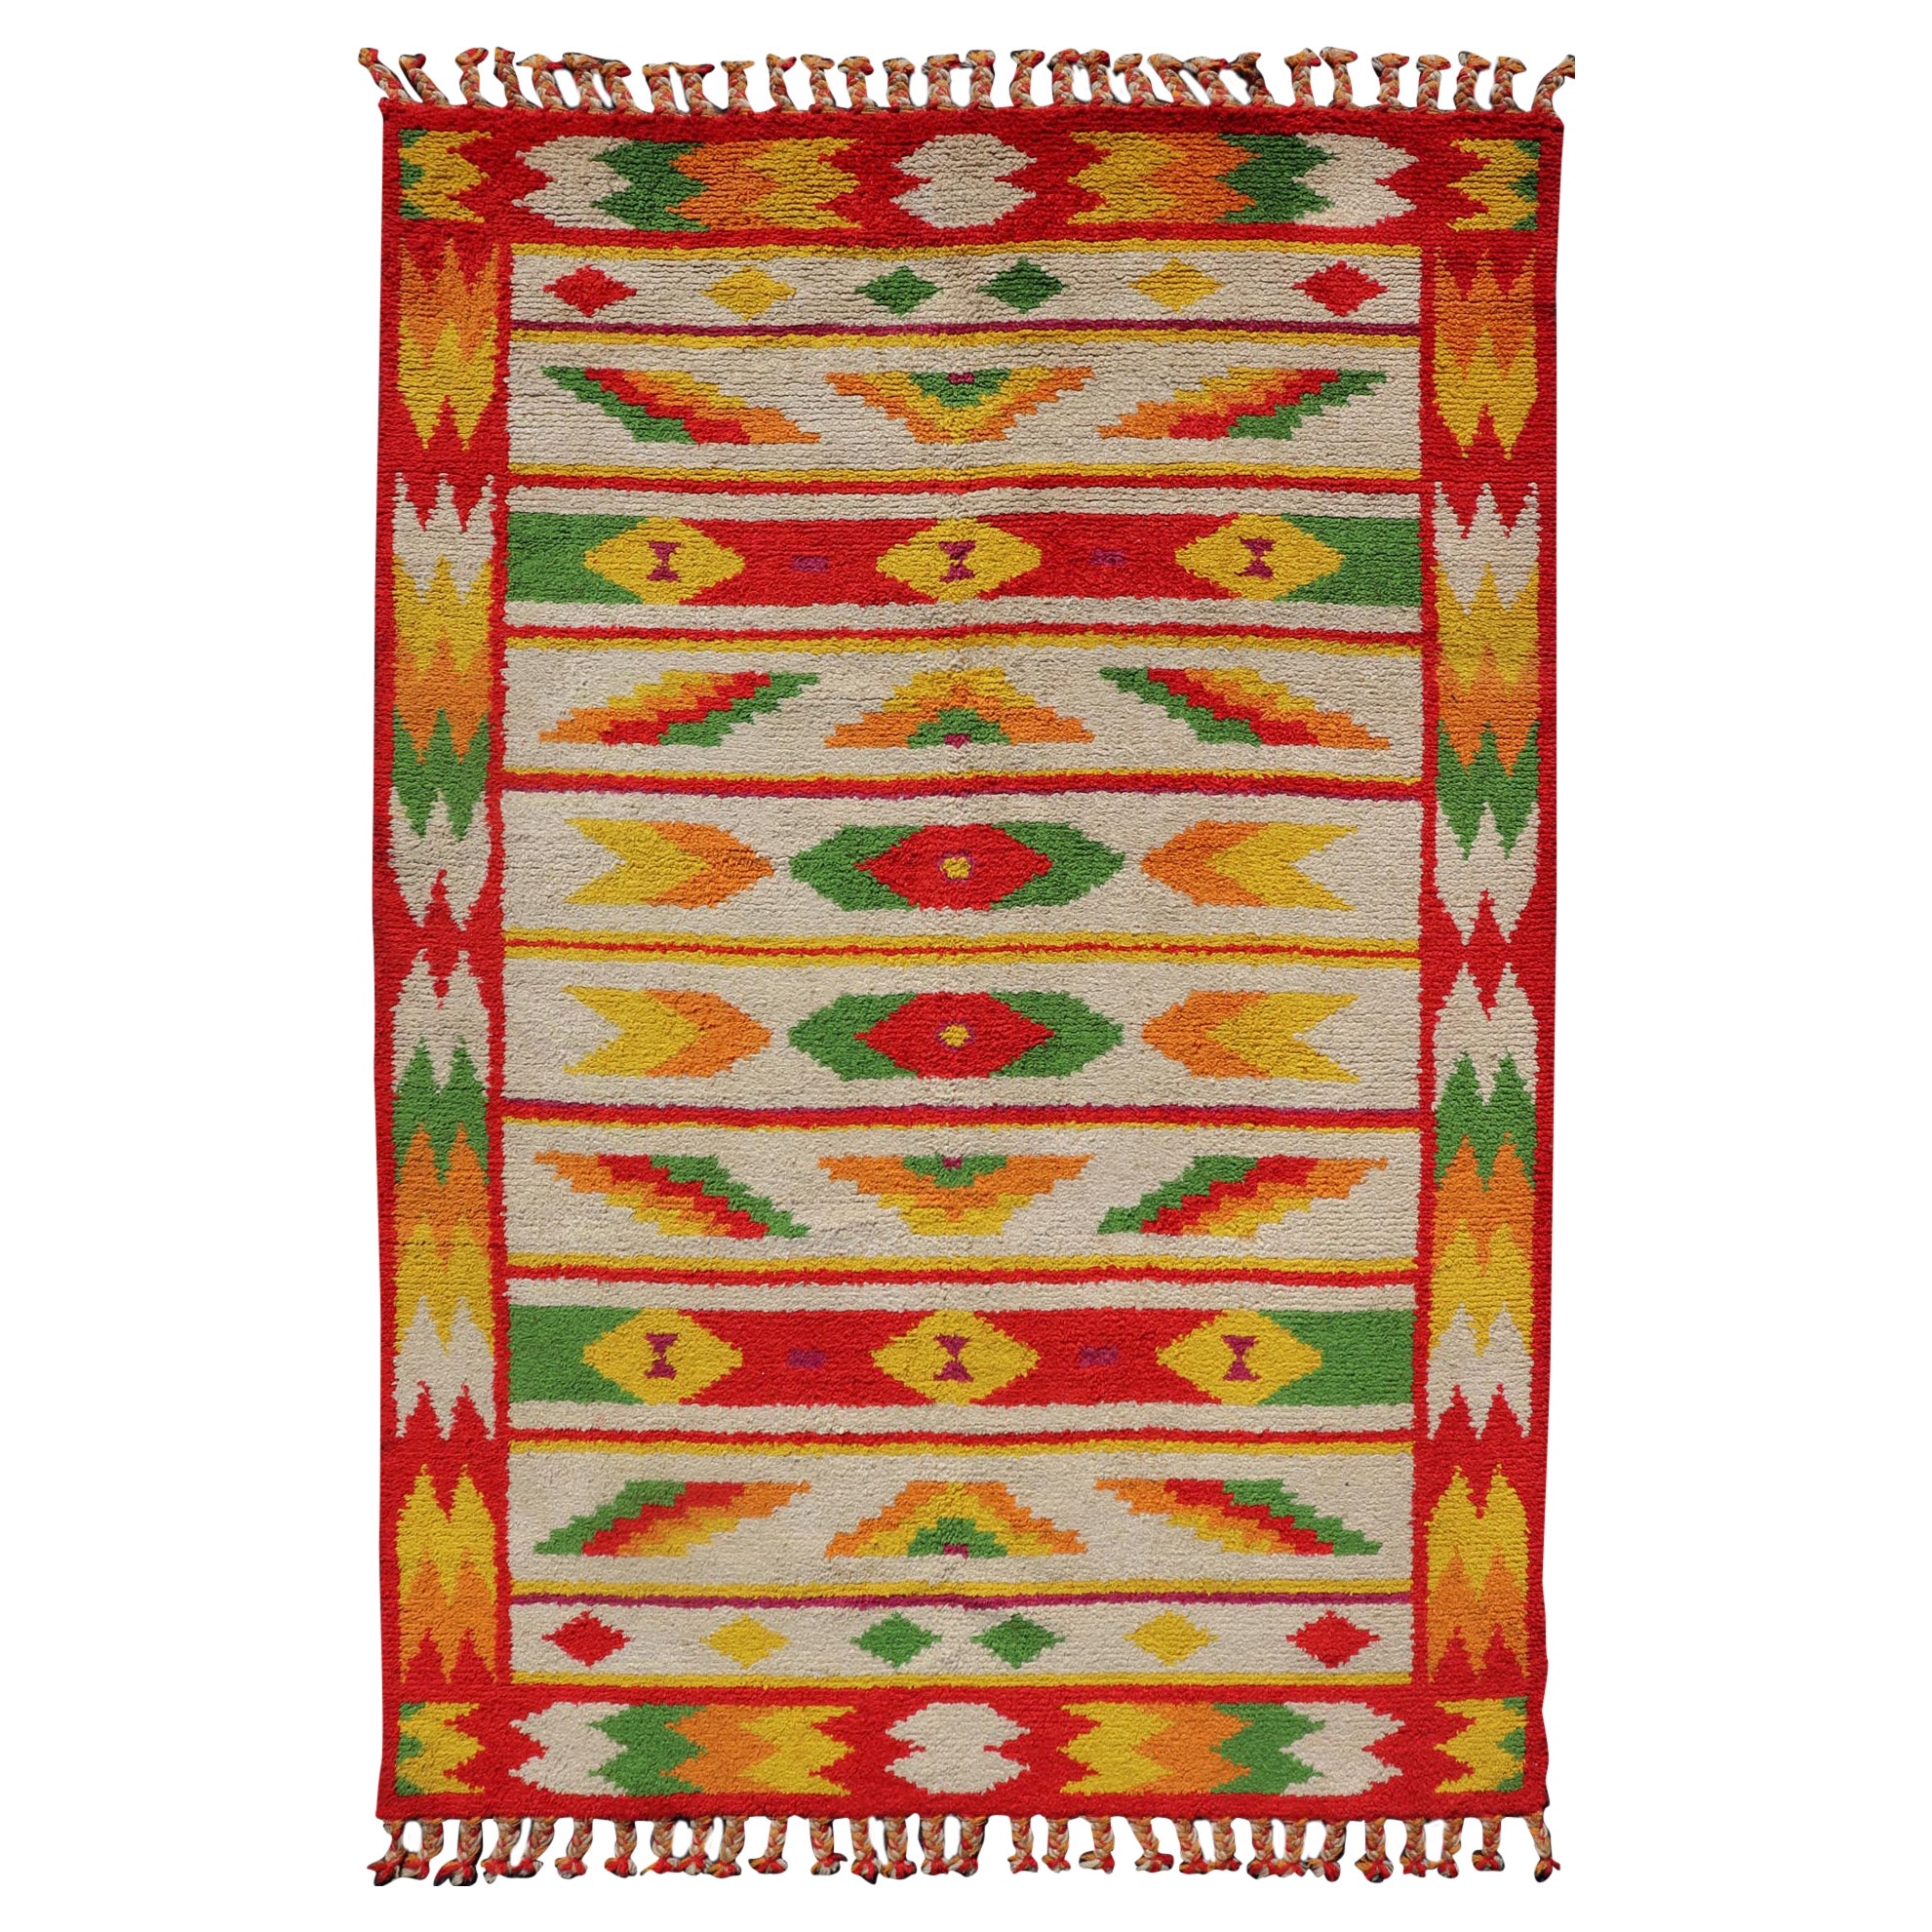 Vintage Moroccan Rug with All-Over Tribal Motif Design In Red, Green & Yellow For Sale